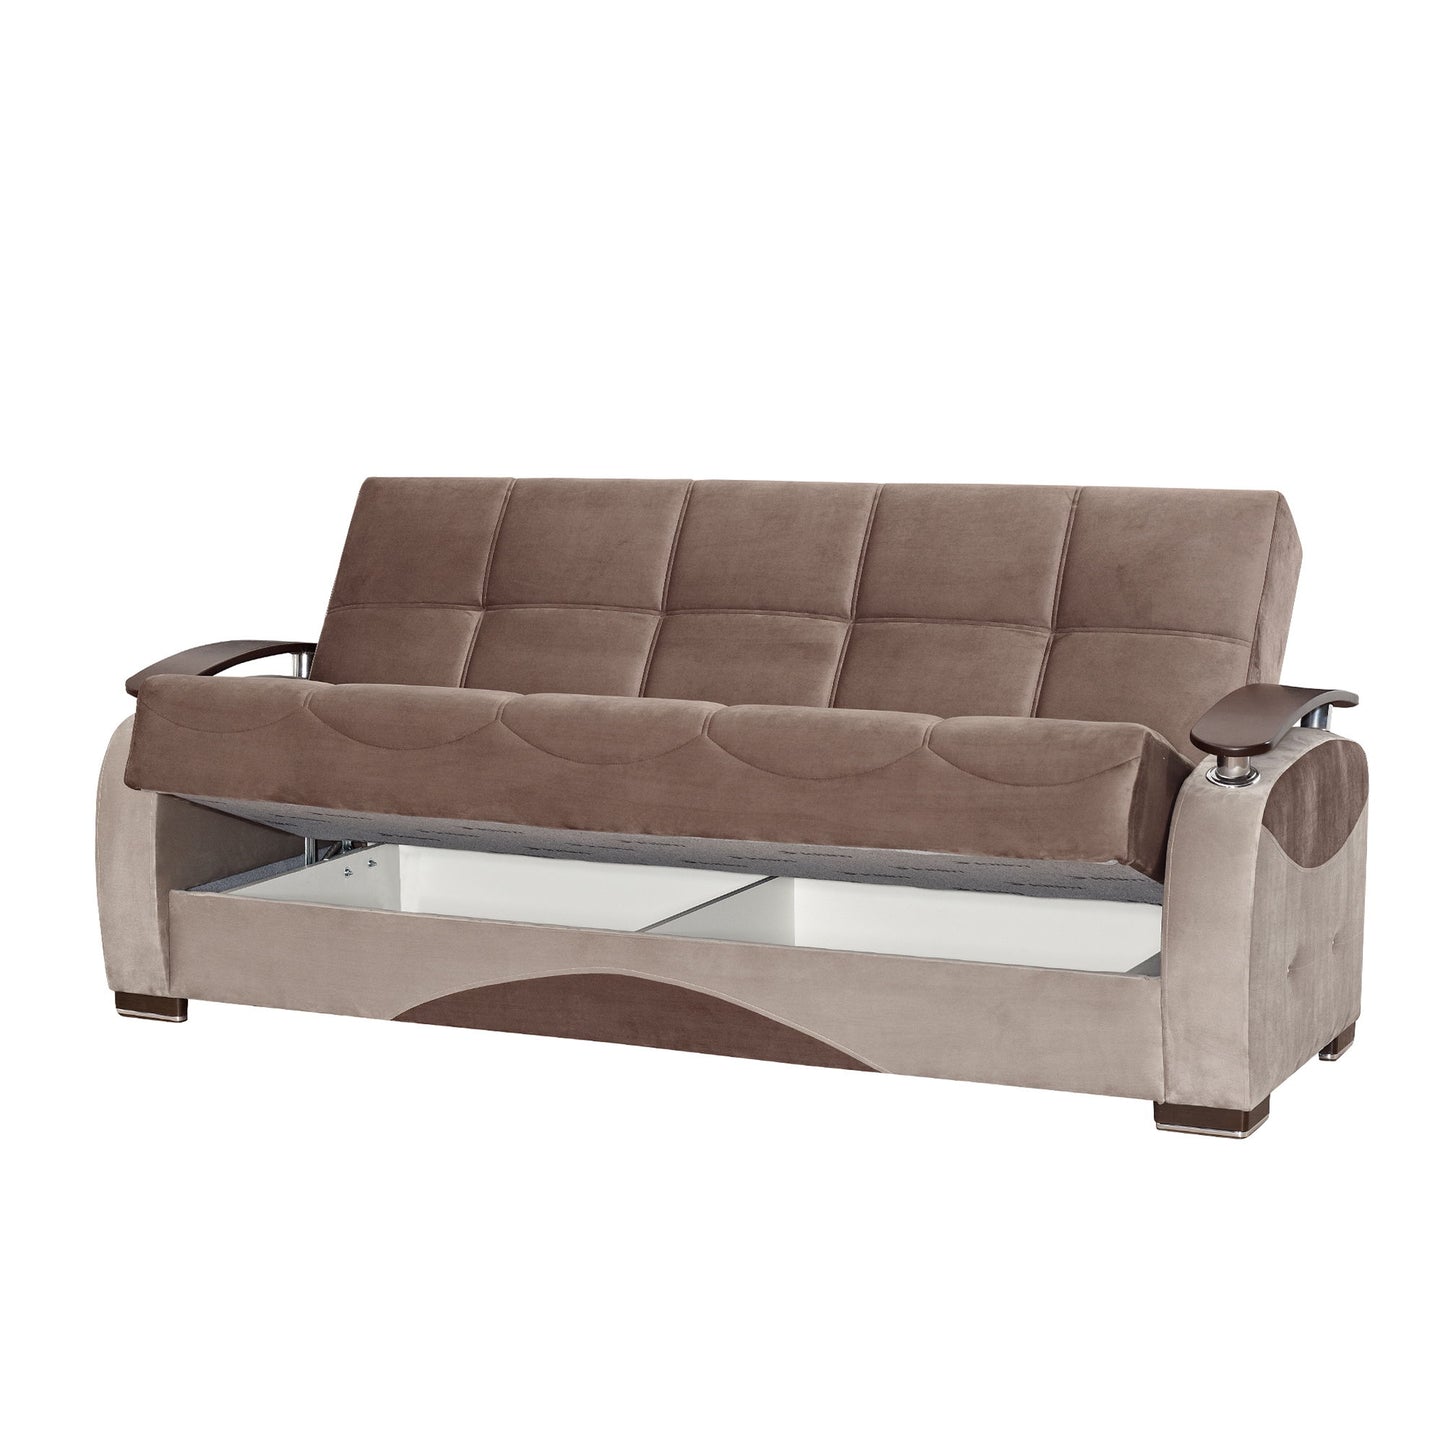 Ottomanson Yafah - Convertible Sofa Bed With Storage